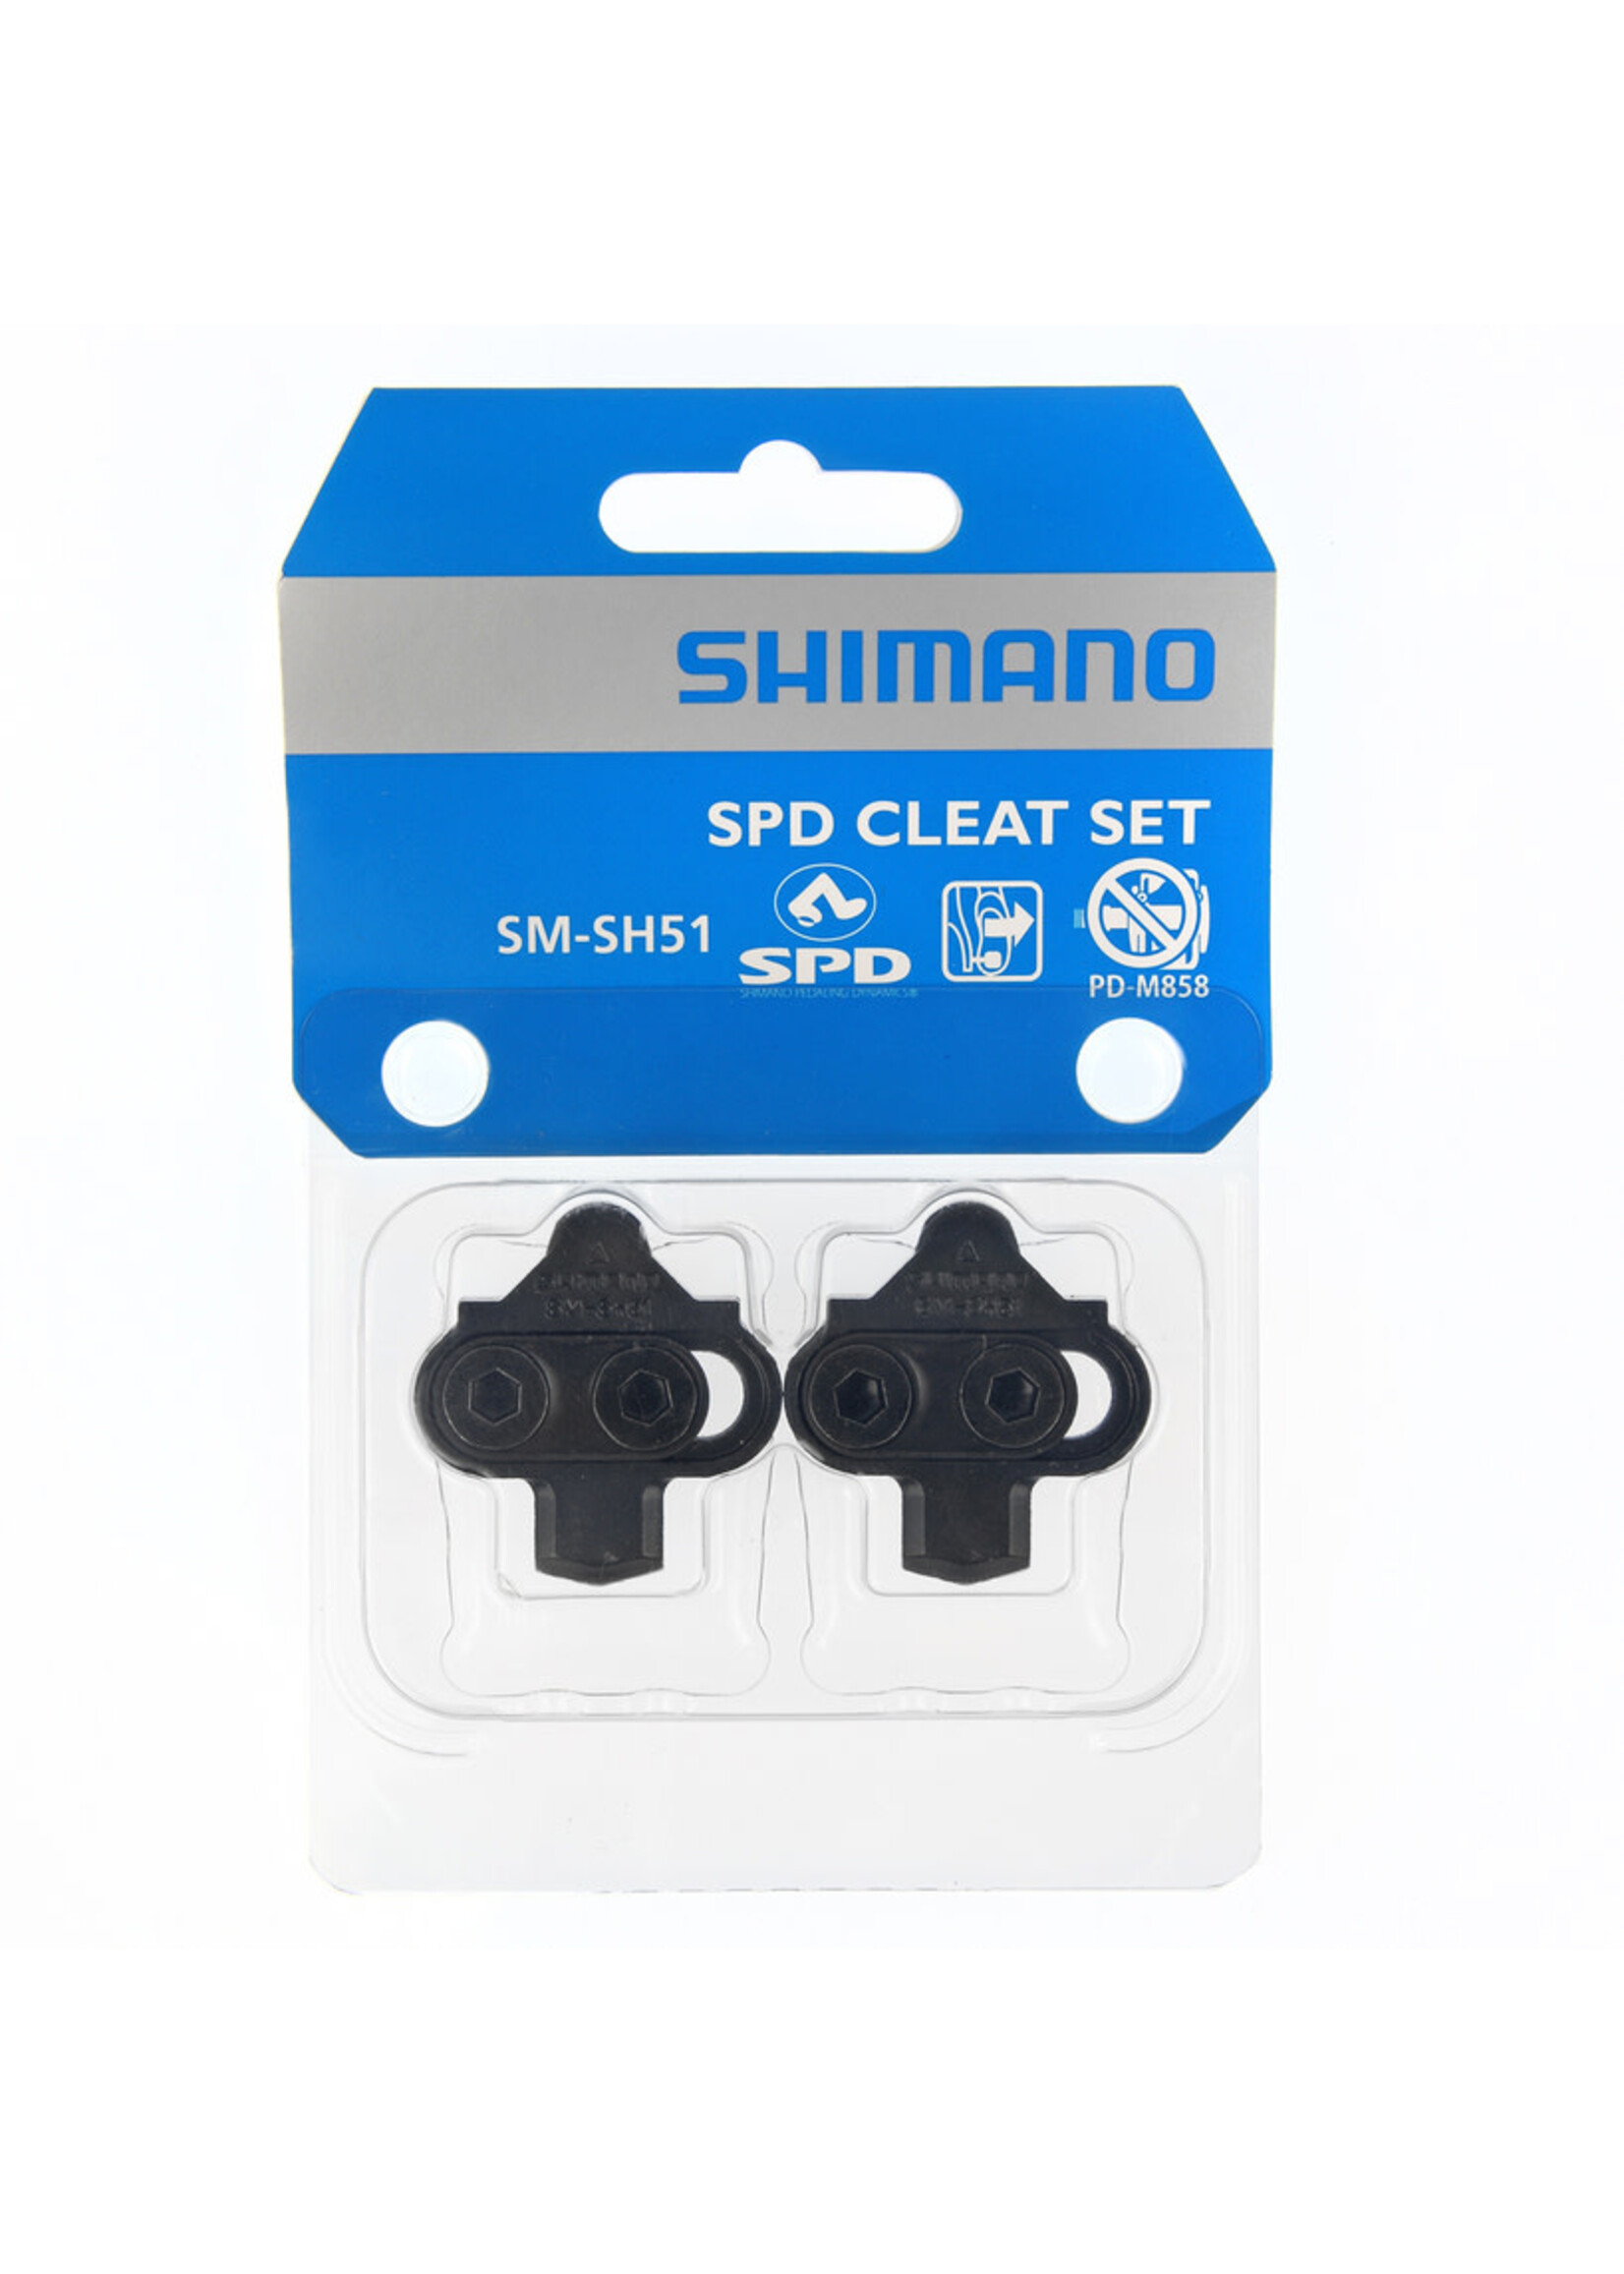 Shimano Shimano SM-SH51 SPD Cleat Set (Pair) Single Release W/O Cleat Nut